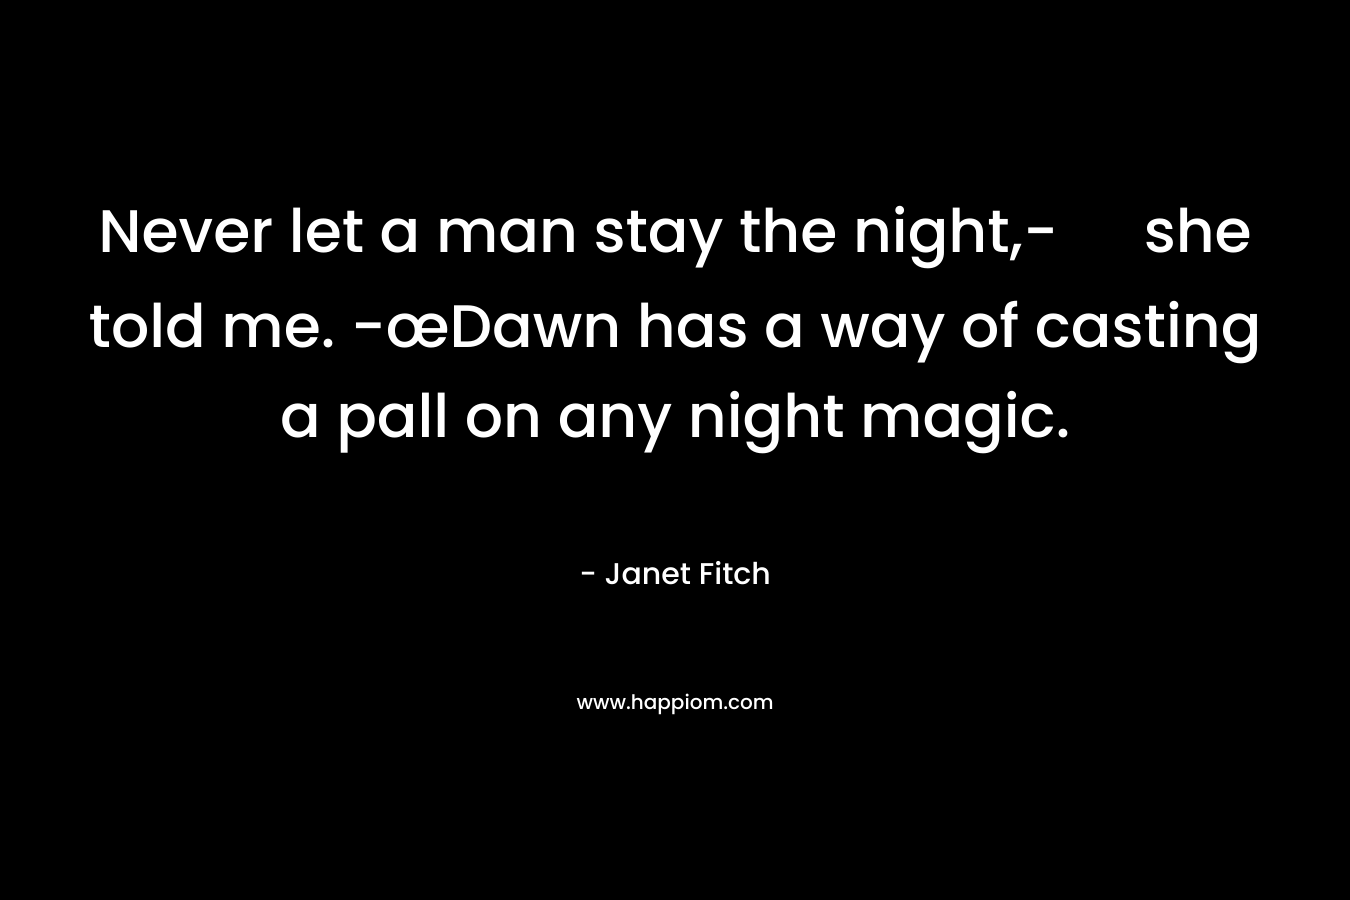 Never let a man stay the night,- she told me. -œDawn has a way of casting a pall on any night magic.